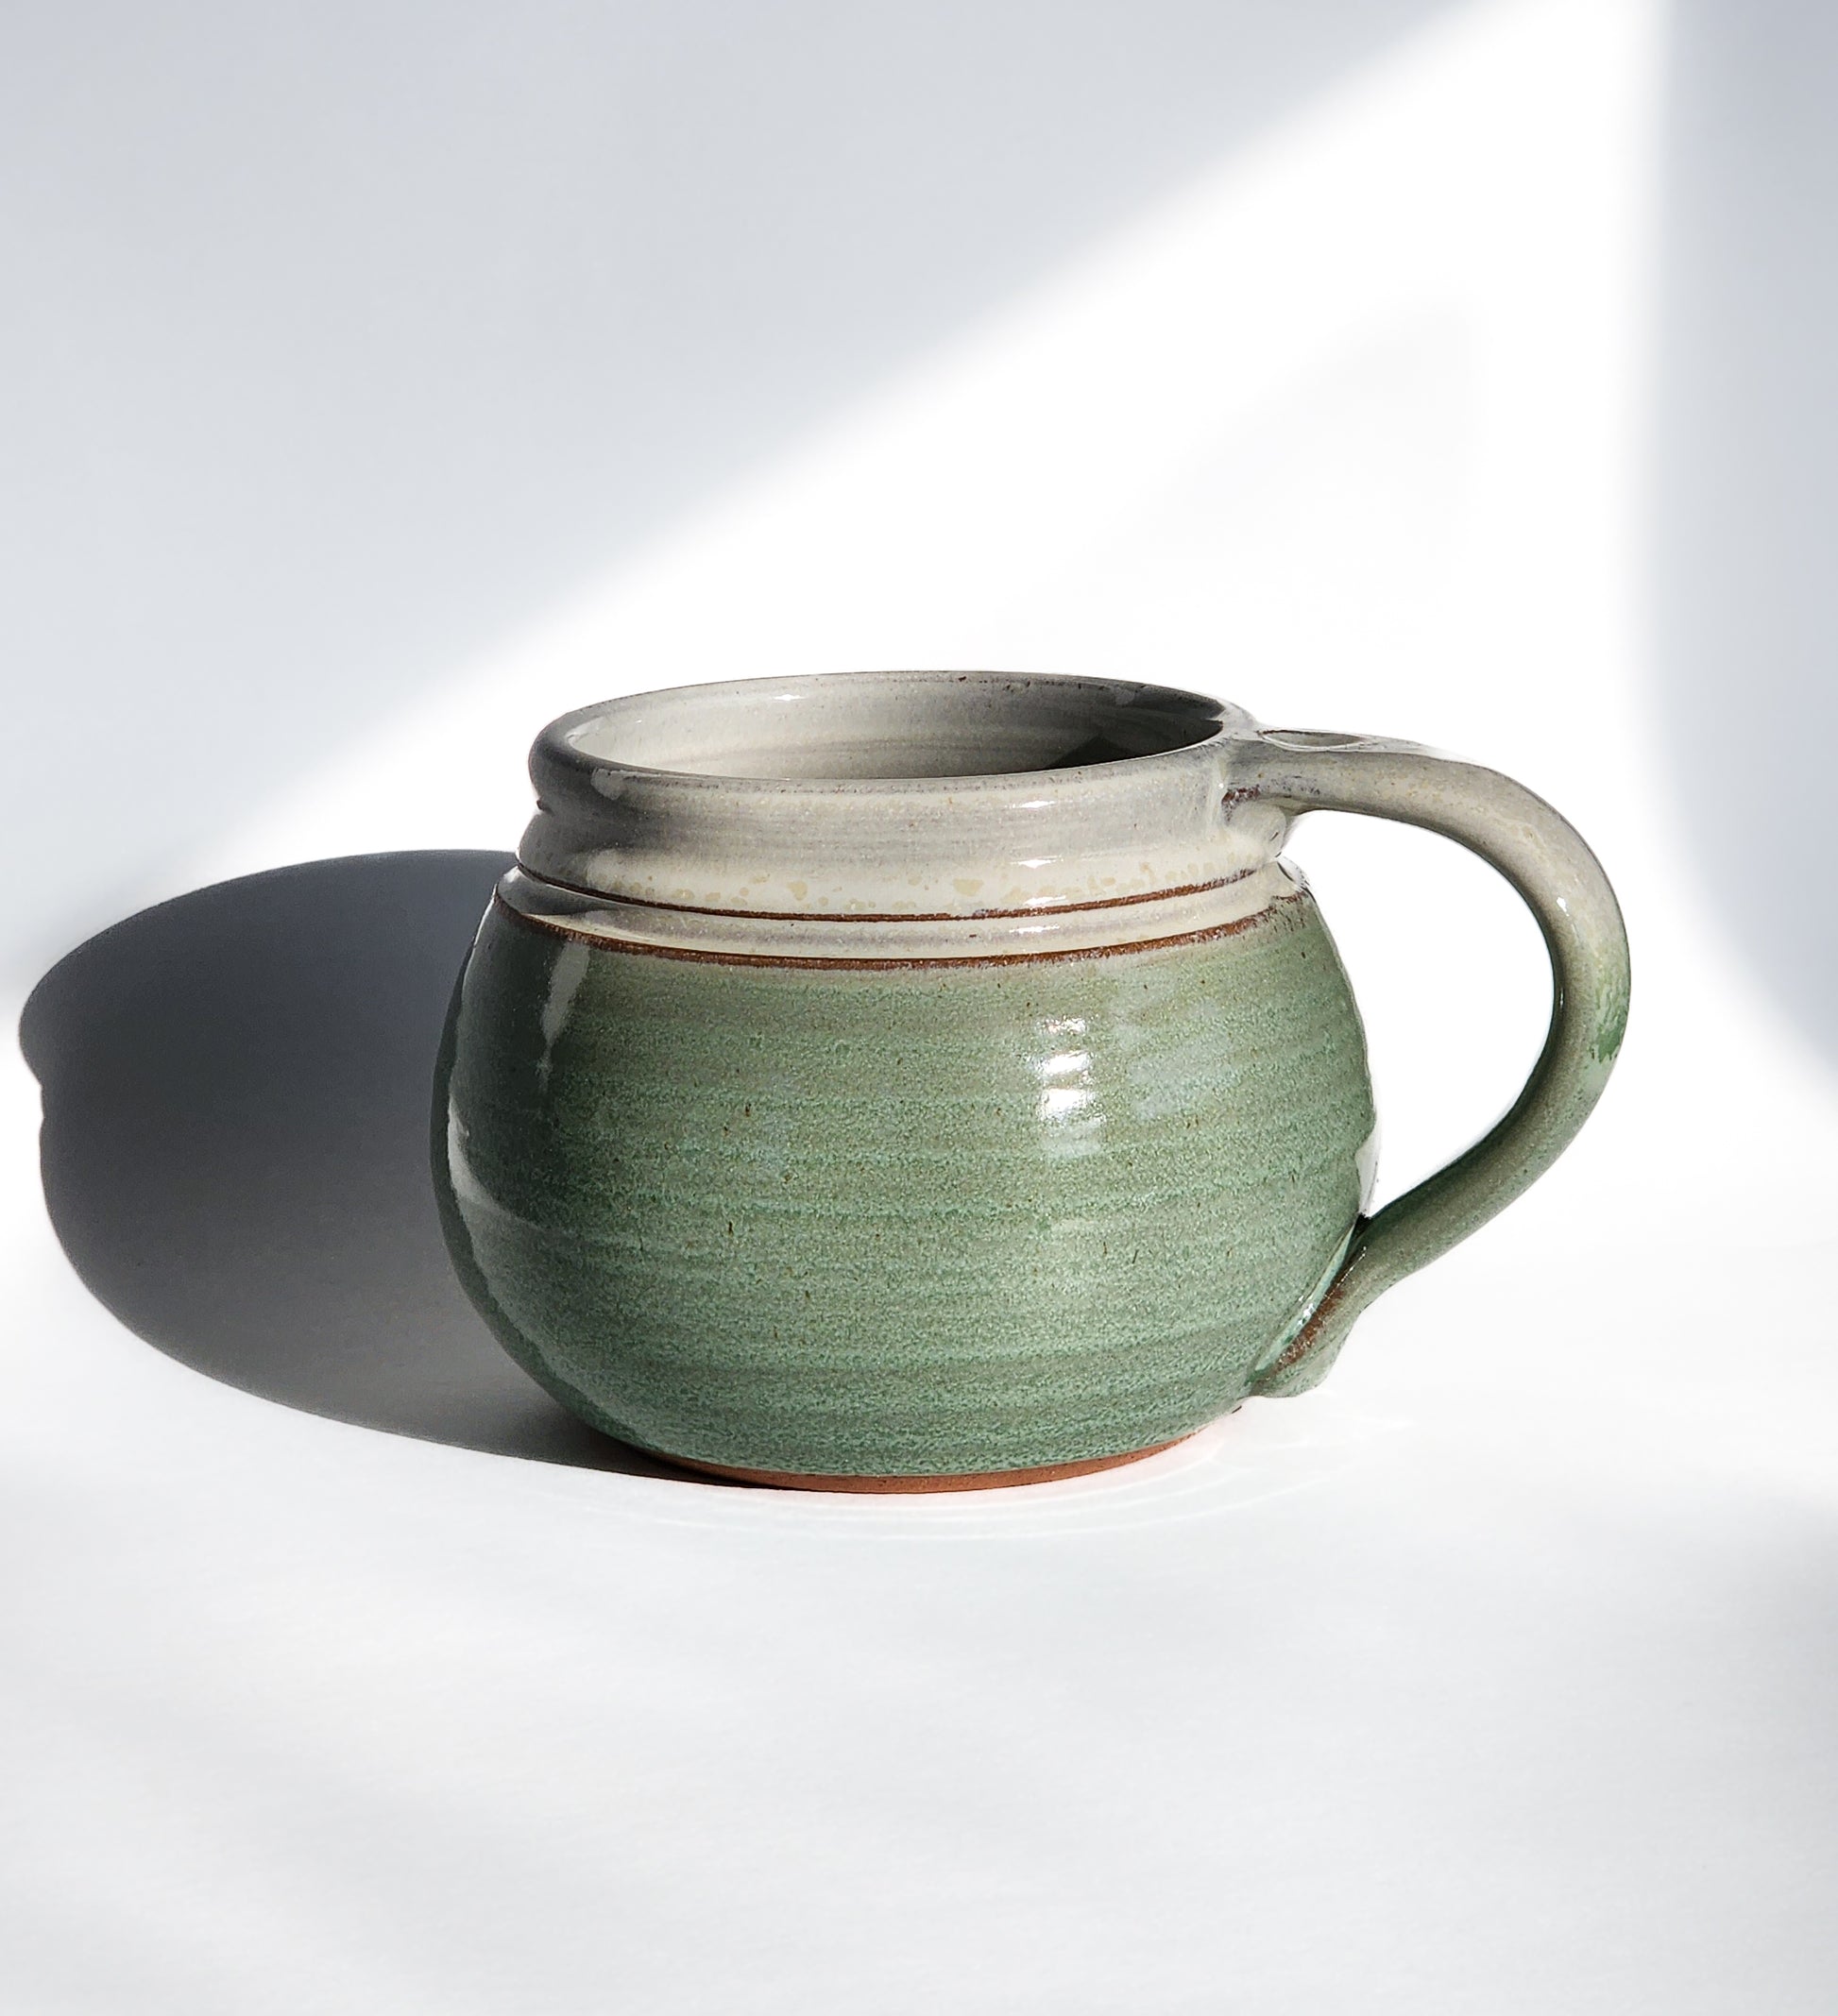 Image: Clinton Pottery's 24 oz Cereal/Soup Mug in Light Green – A fresh and invigorating addition to your kitchen, this machine washable mug seamlessly blends artistry with functionality. The Light Green color adds a touch of nature's vitality, reminiscent of lush greenery and sunlit meadows. Perfect for enjoying your favorite cereal or soup, bringing a breath of natural elegance to your dining experience.